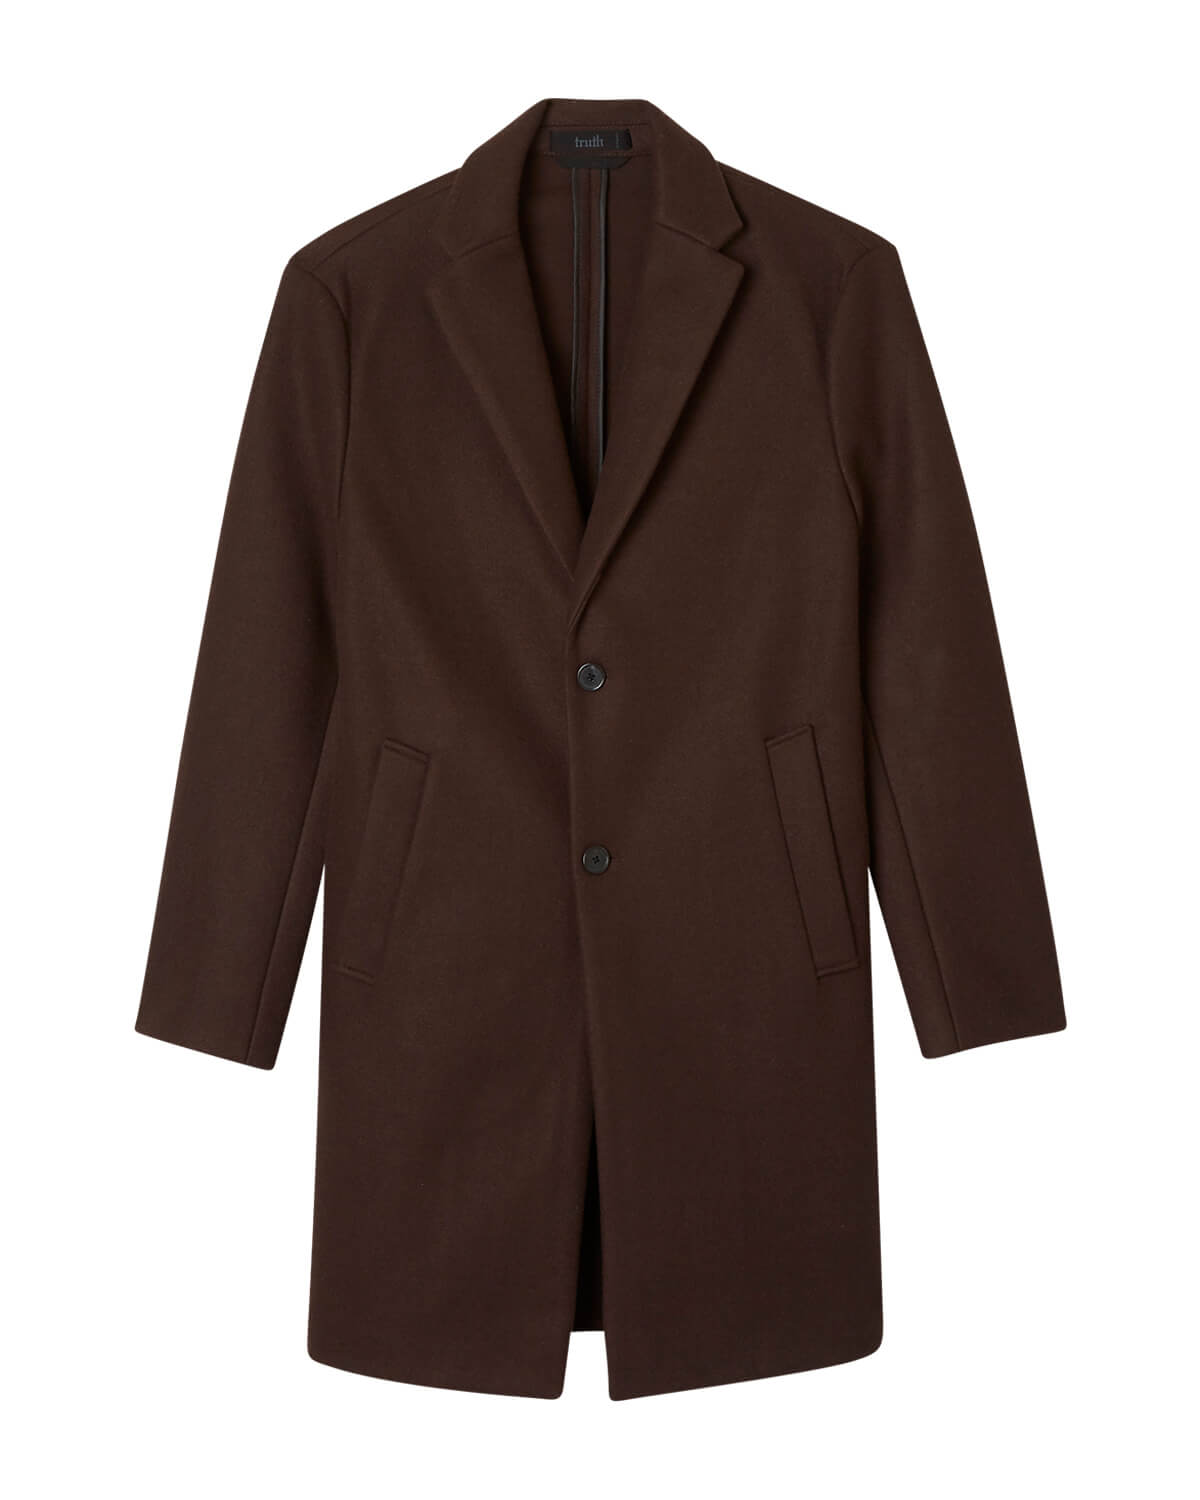 Shop Stretch Fabric Tailored Two-Button Coat | Truth Men | JANE + MERCER